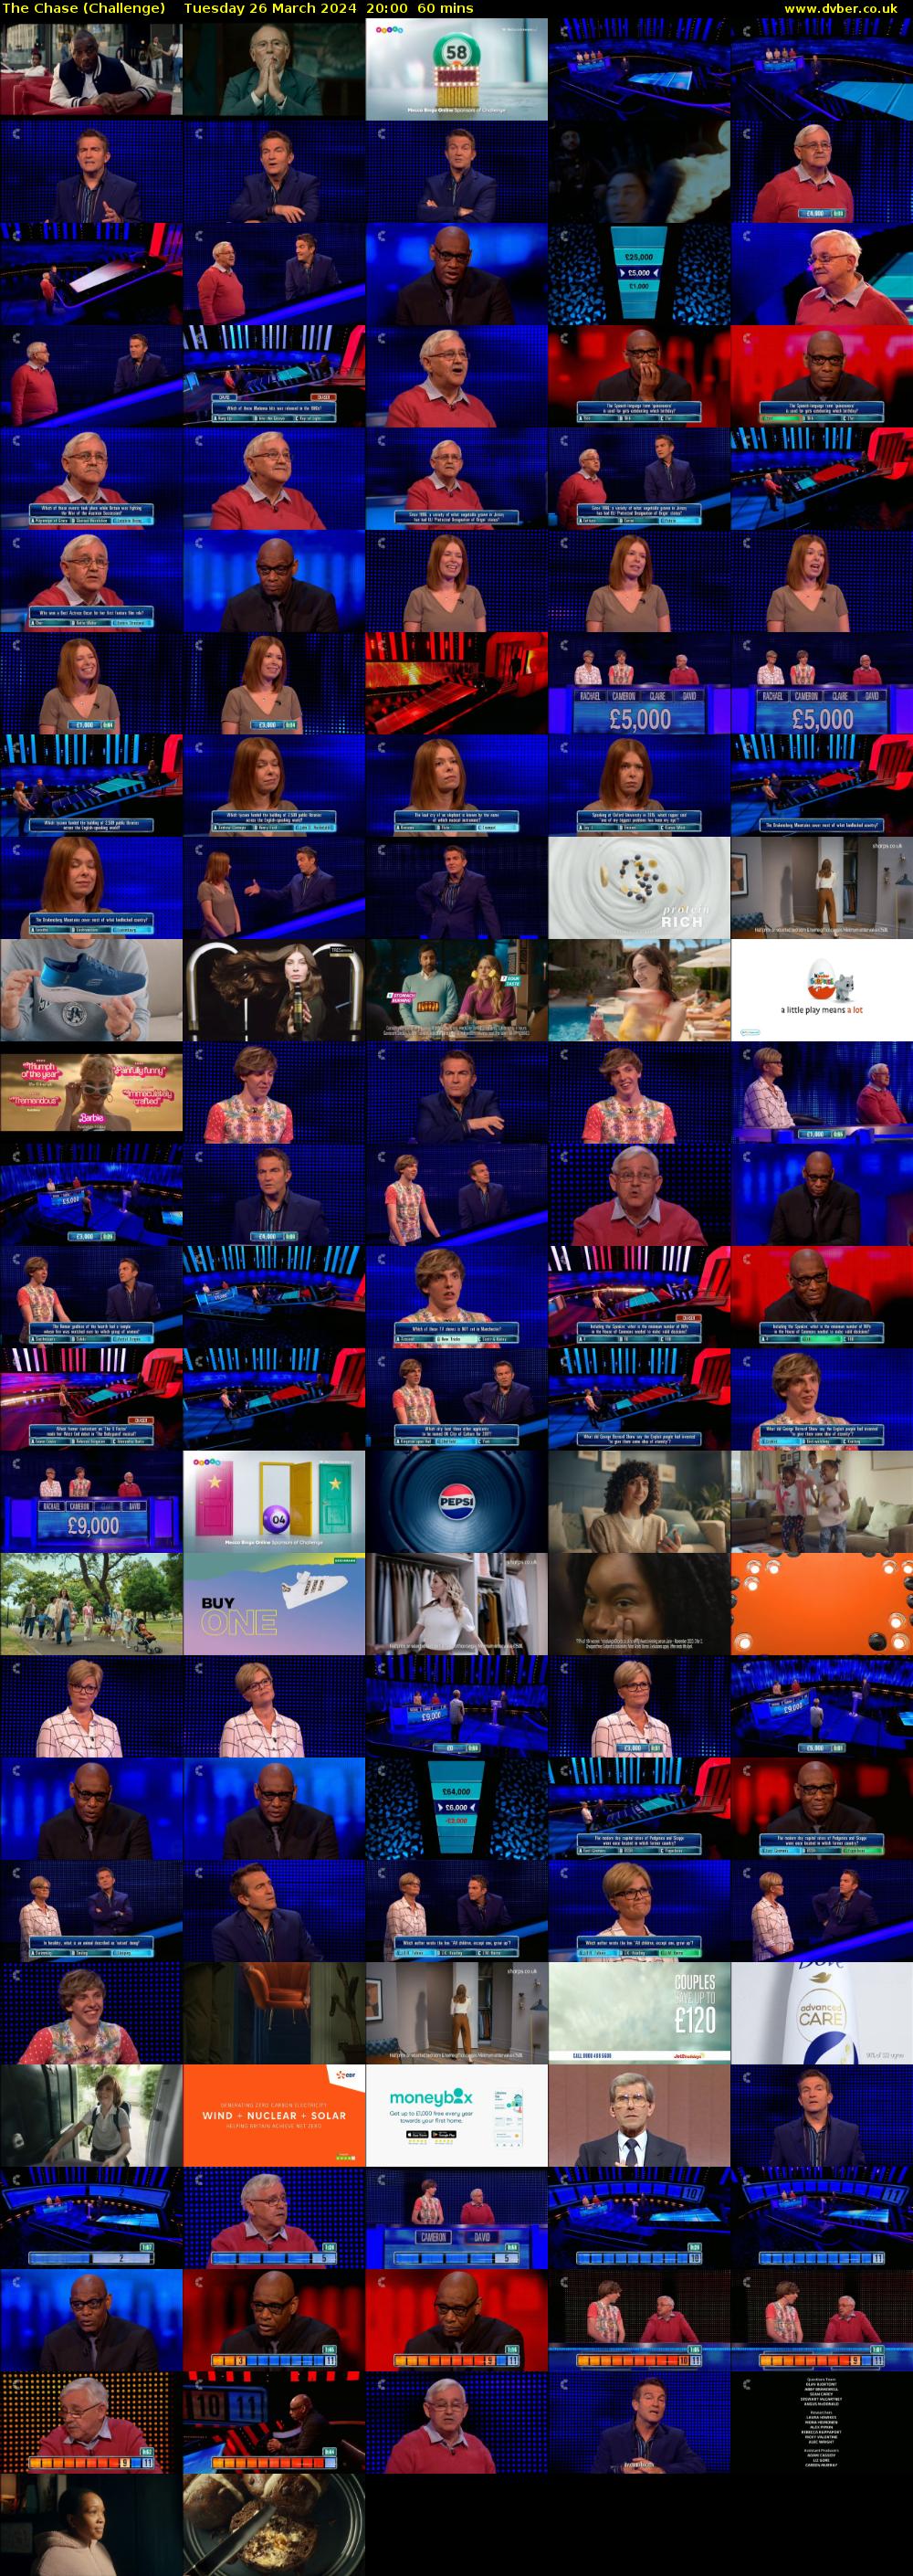 The Chase (Challenge) Tuesday 26 March 2024 20:00 - 21:00